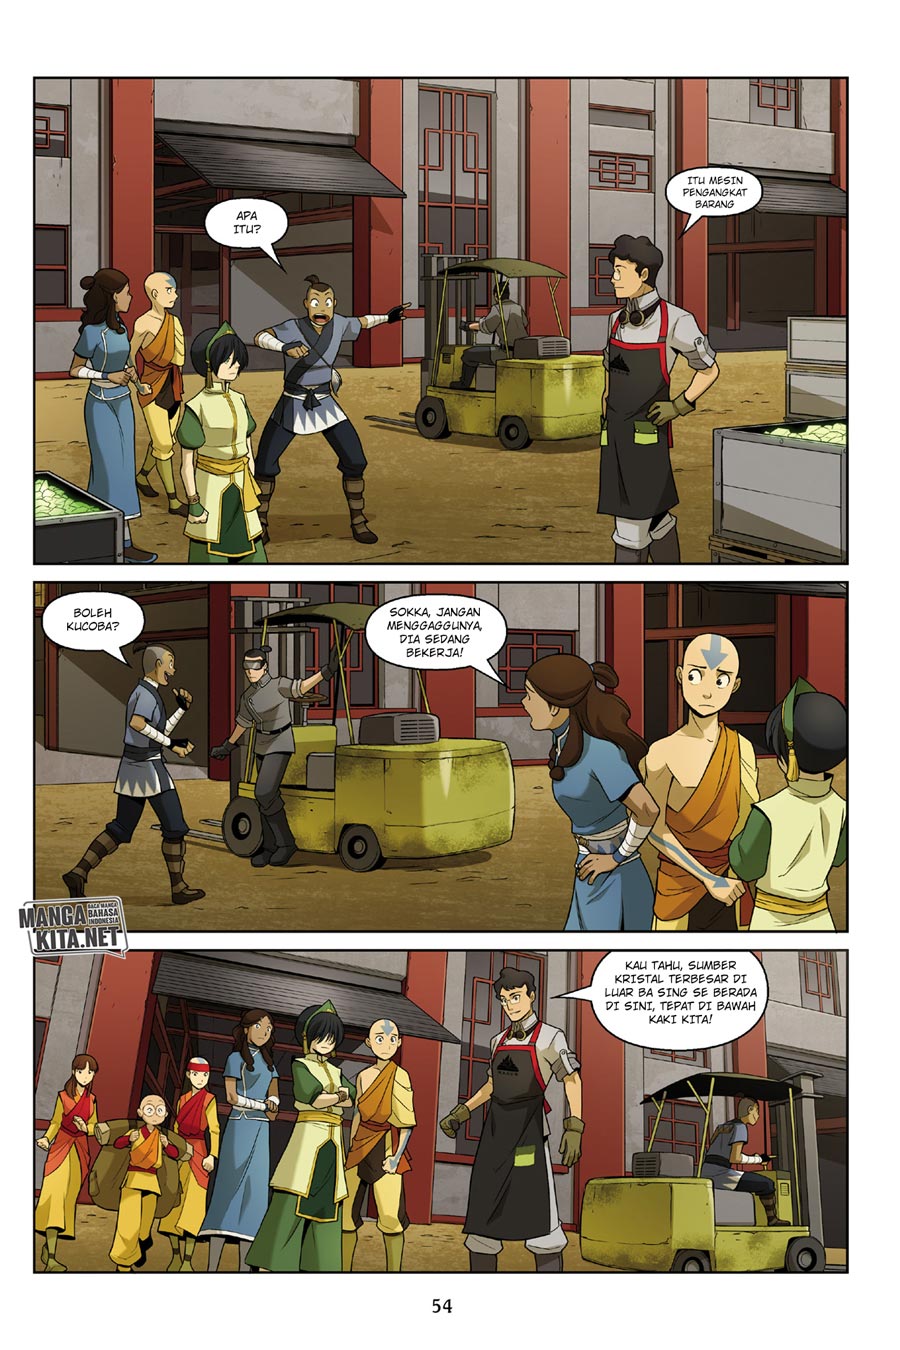 Avatar The Last Airbender – The Rift Chapter 1.3